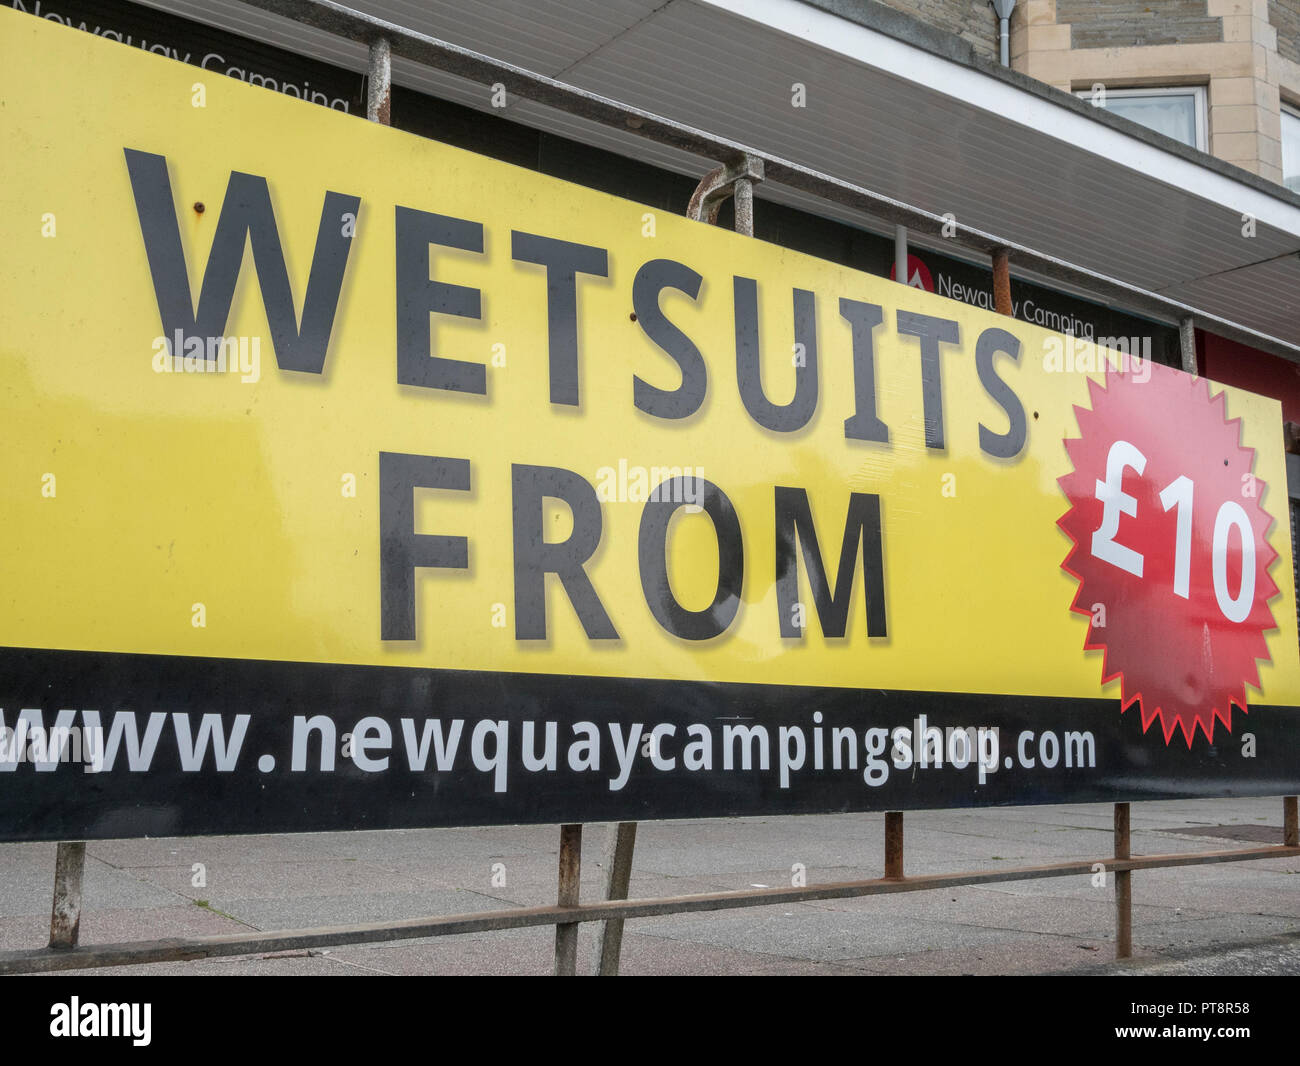 Hoarding outside Newquay camping shop offering surfing wetsuit hire service. Stock Photo